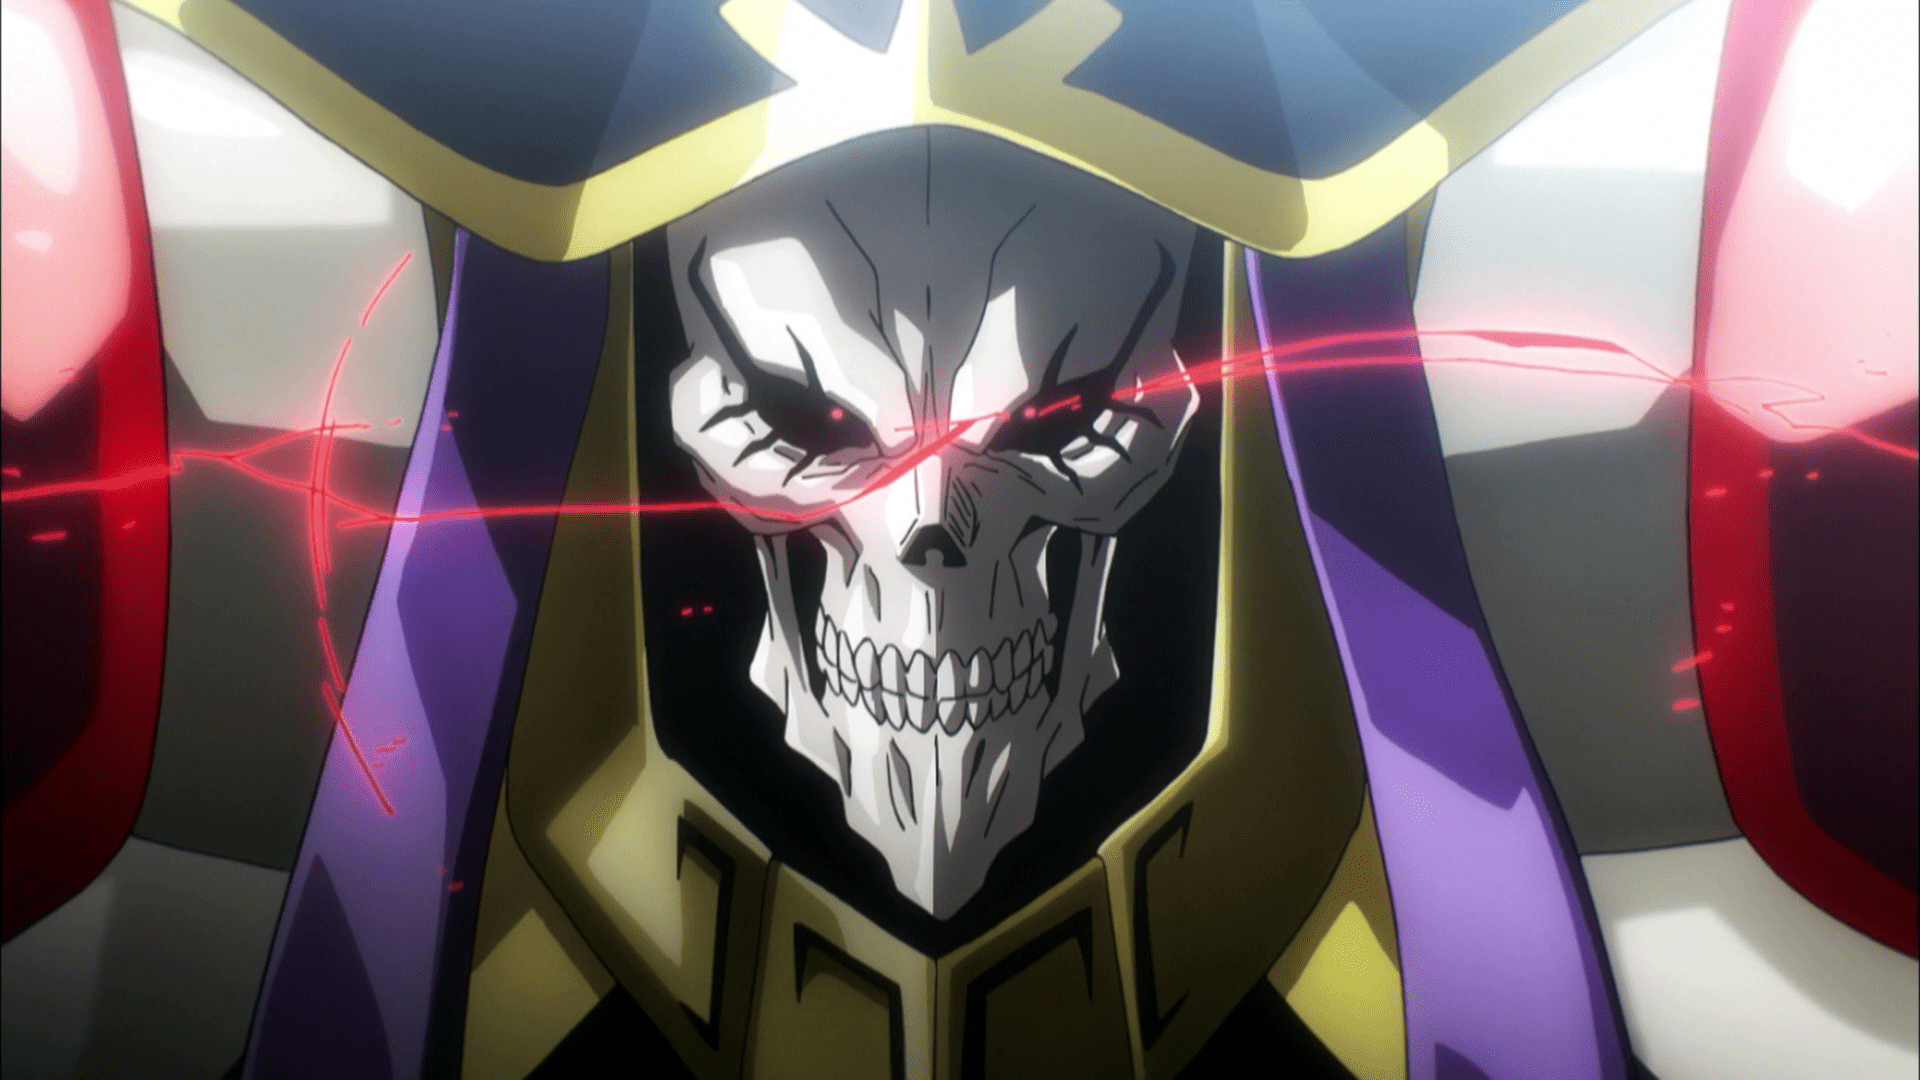 Mobile wallpaper Anime Overlord Ainz Ooal Gown 1345874 download the  picture for free